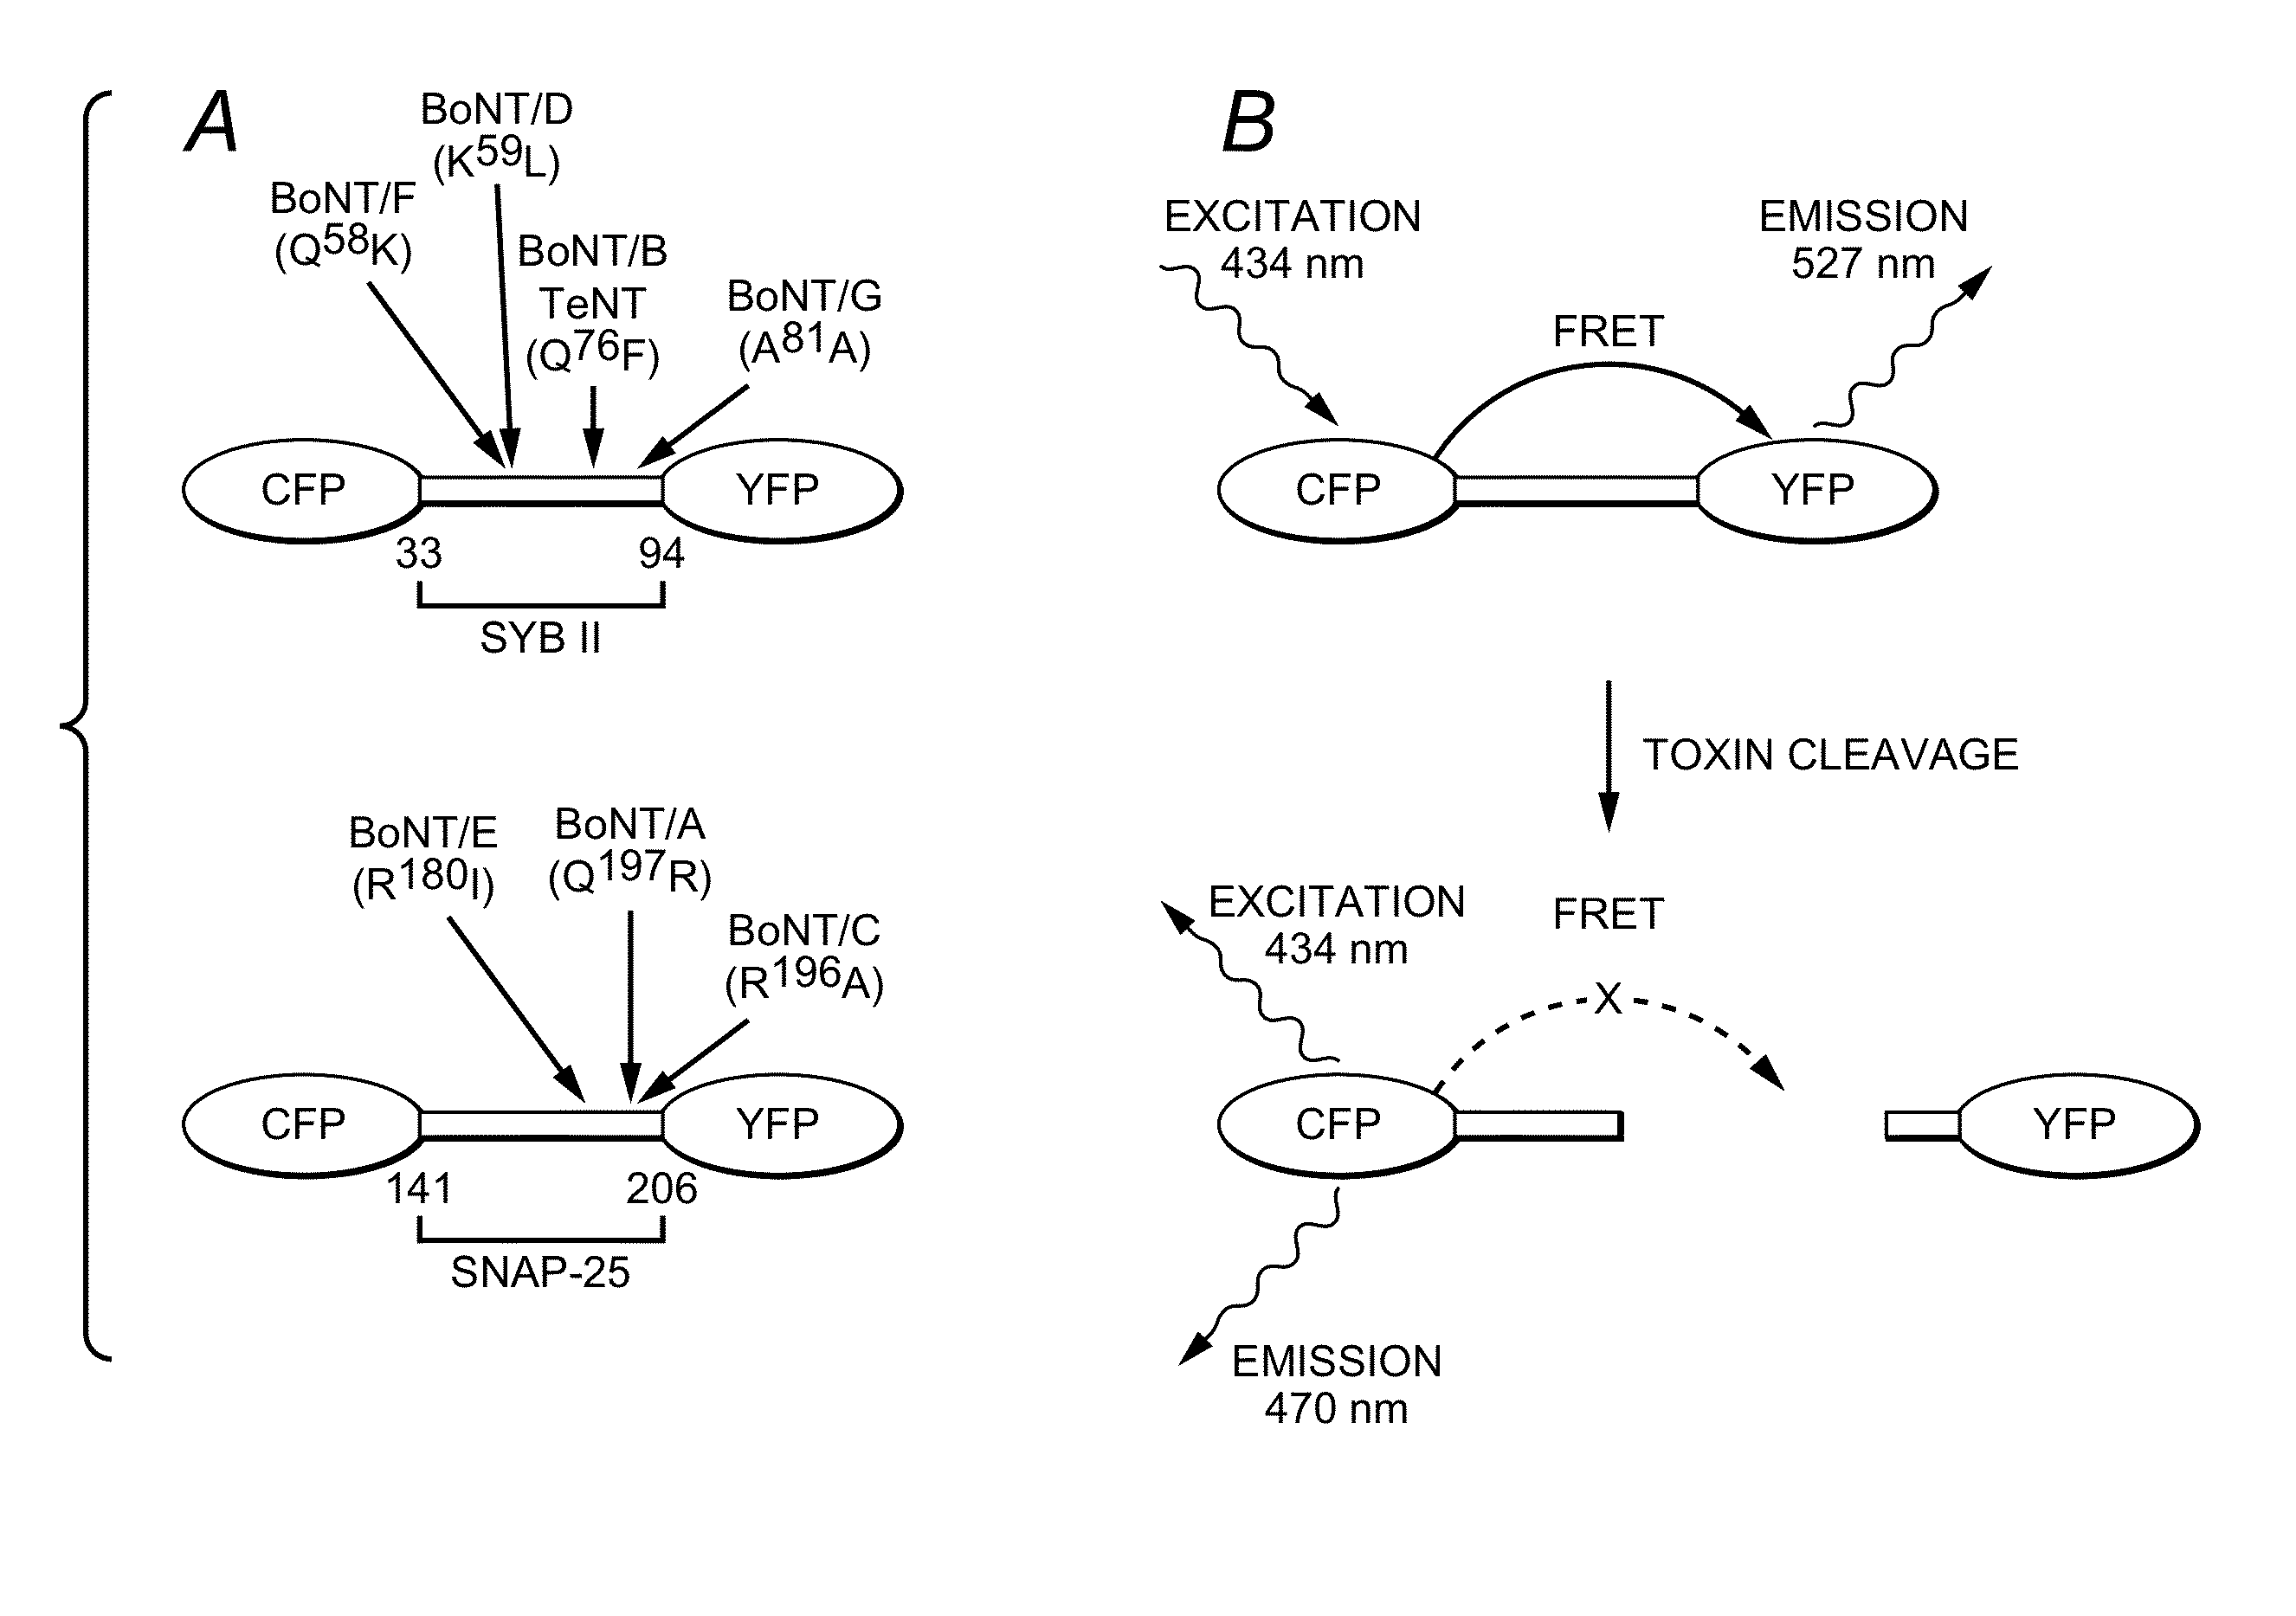 Resonance Energy Transfer Assay with Cleavage Sequence and Spacer